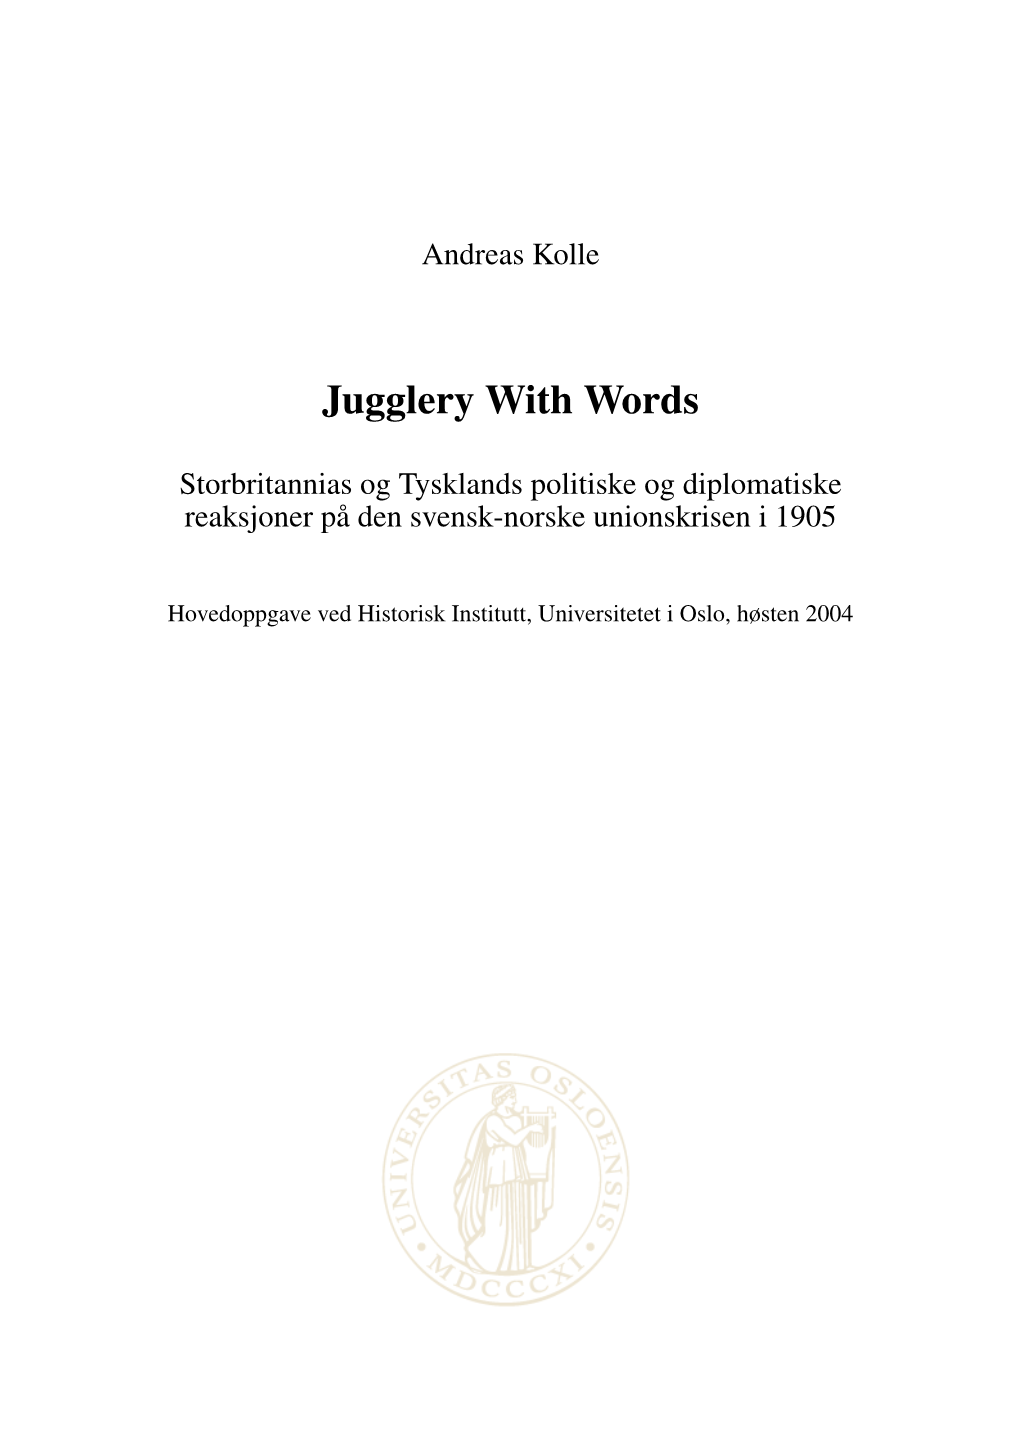 Jugglery with Words